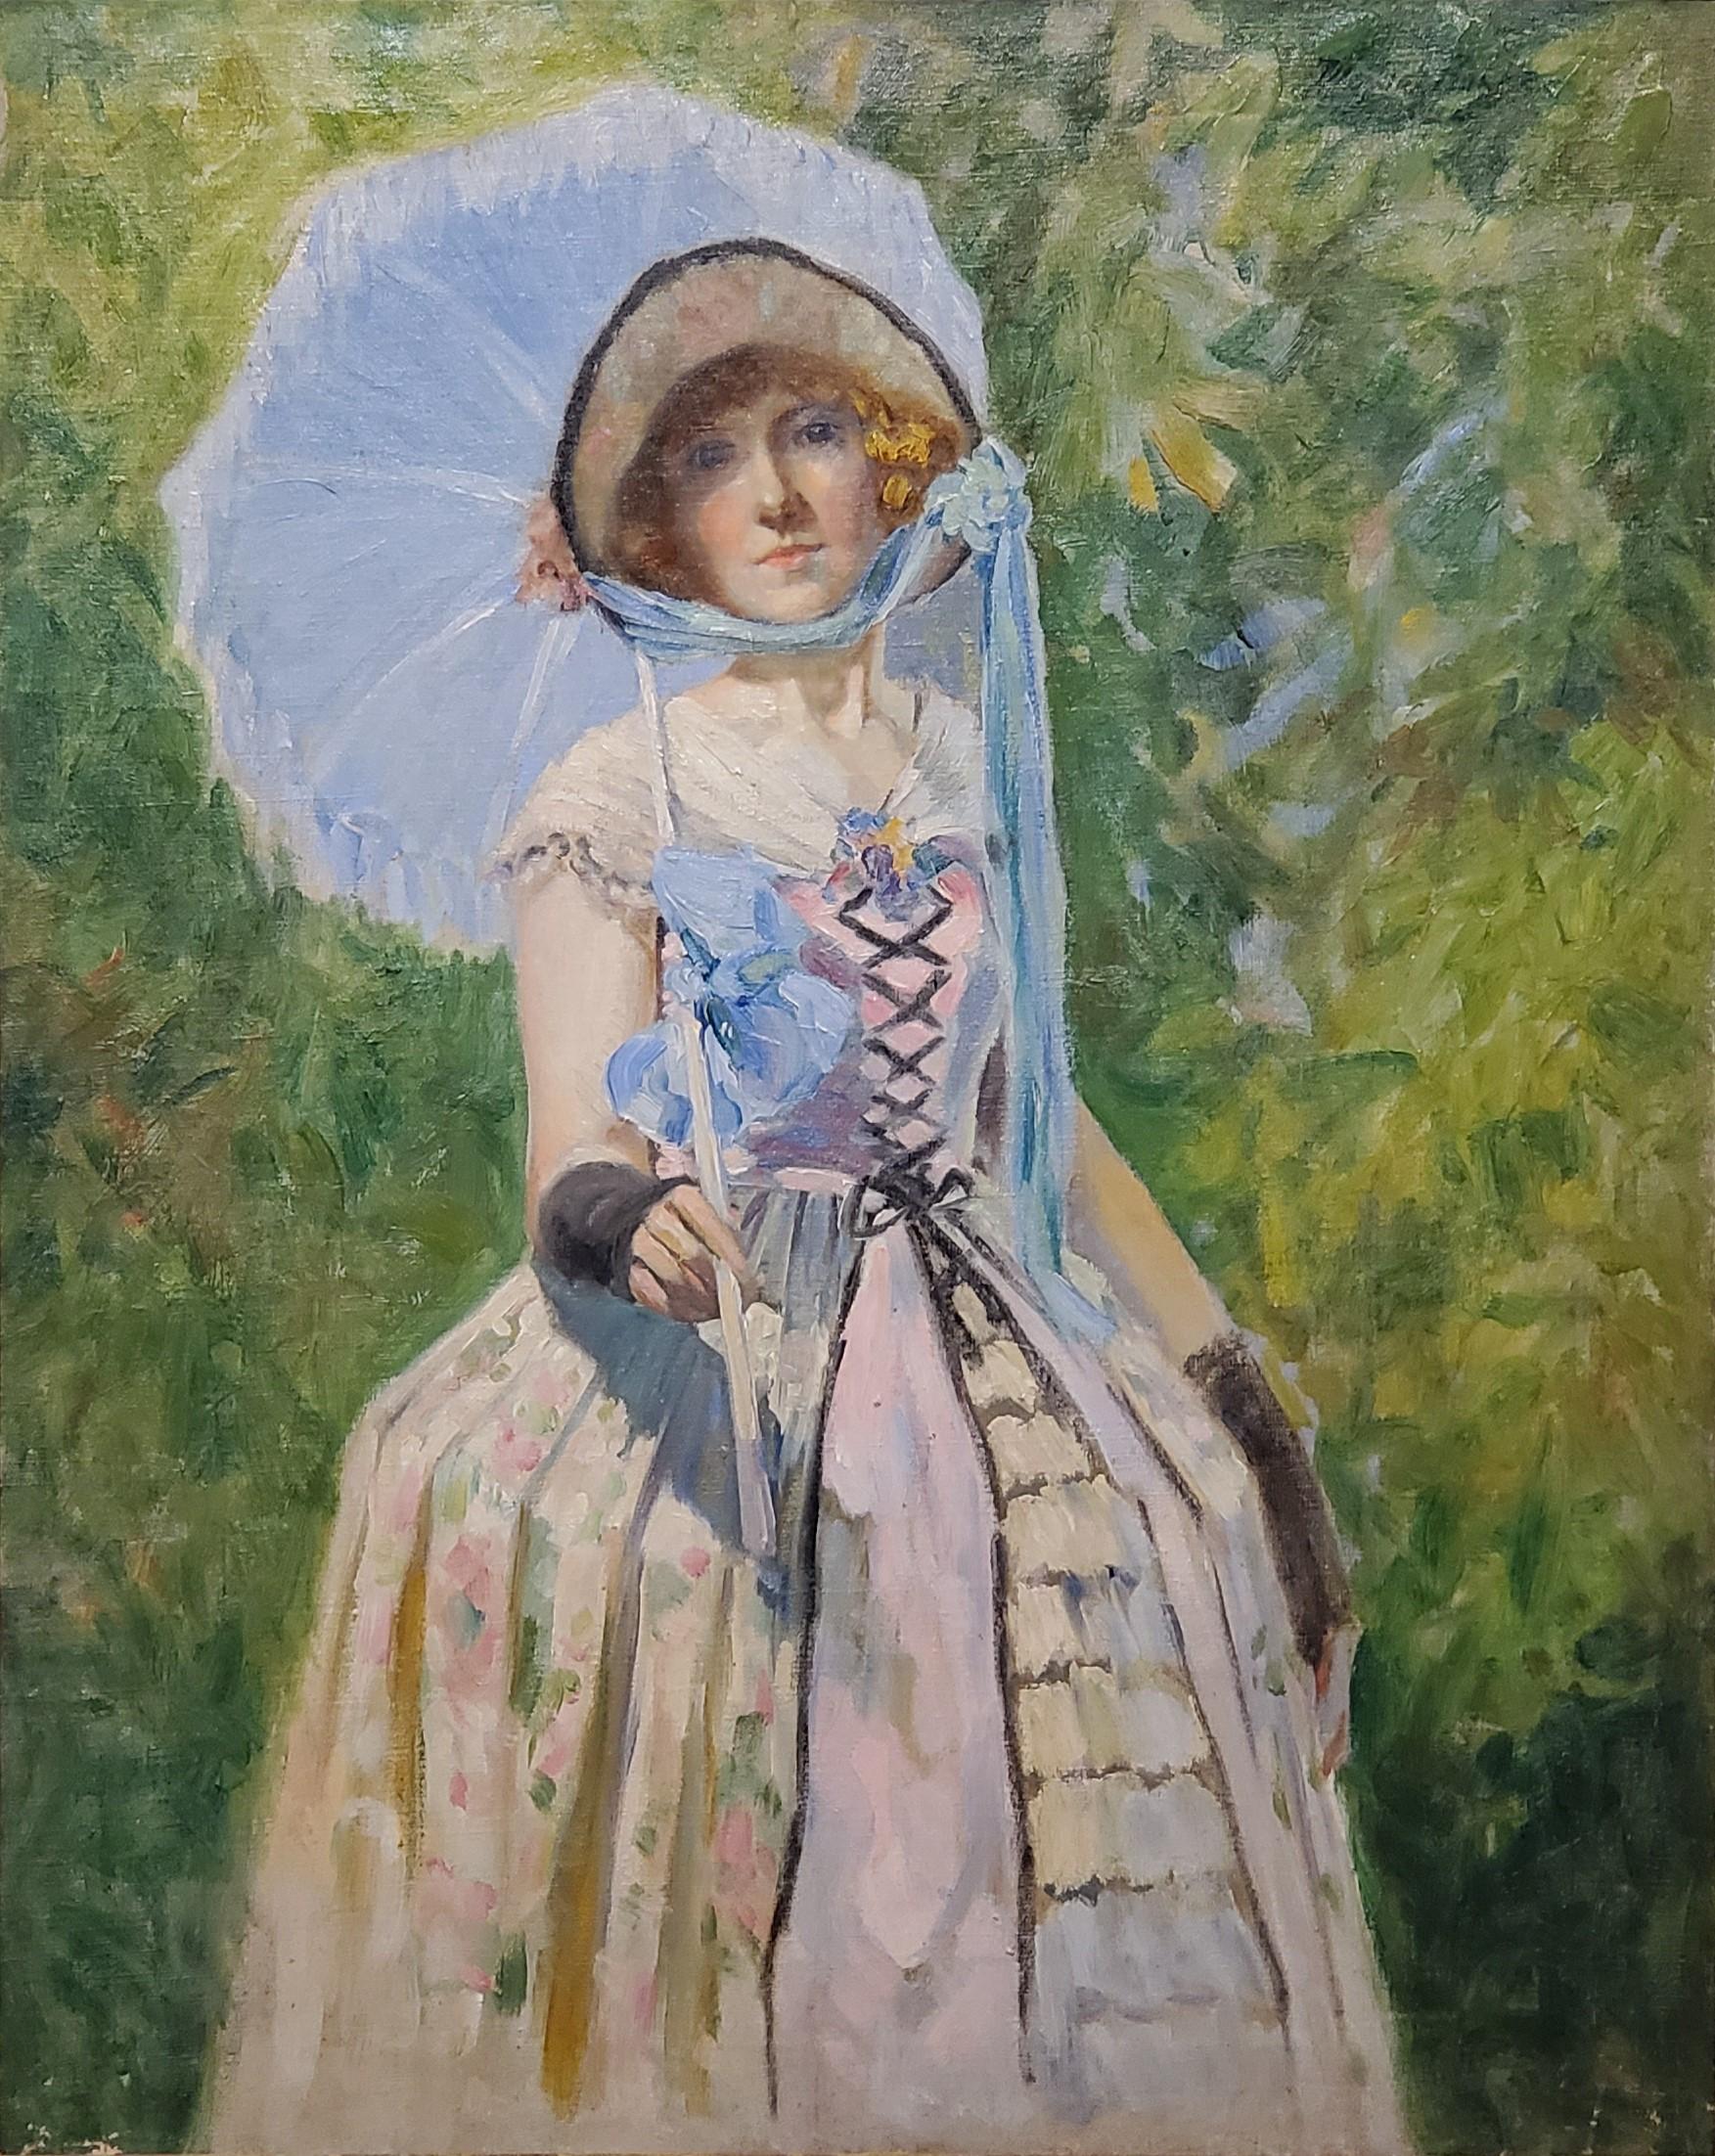 Portrait of a Woman Under A Bright Blue Umbrella dated 1924 - Painting by Magnus Bakke